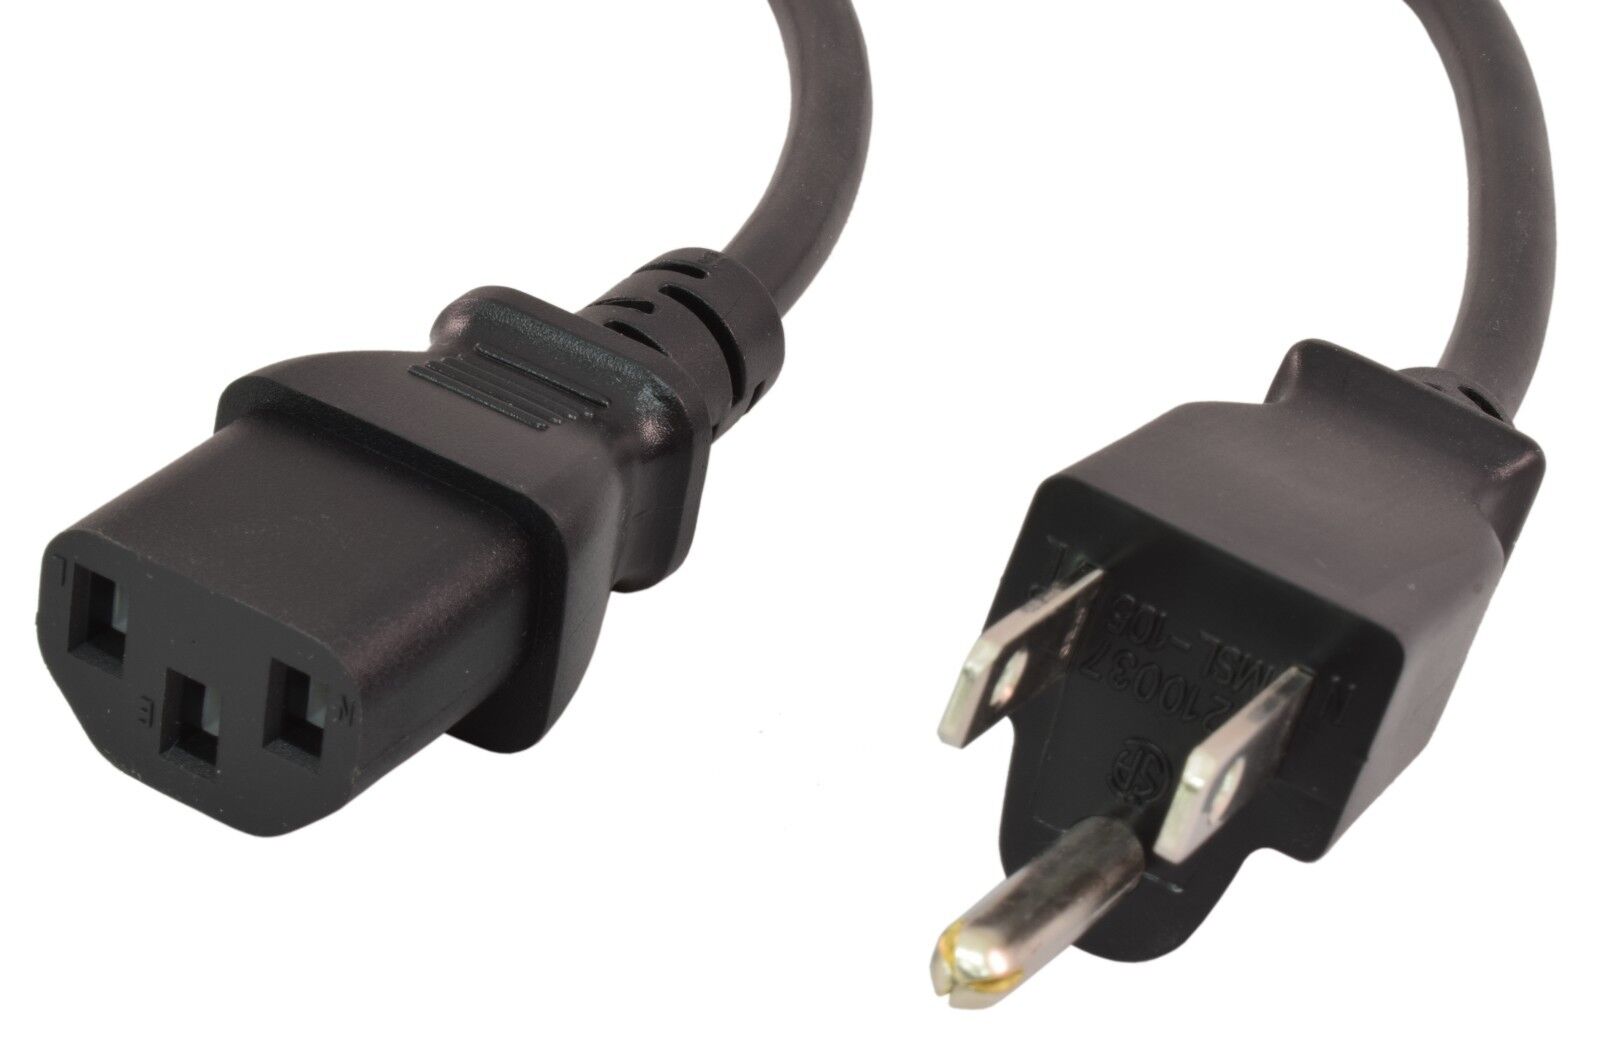 PTC Black 14 AWG AC 3 Prong US Universal Replacement Power Cord 25 ft. - NEW